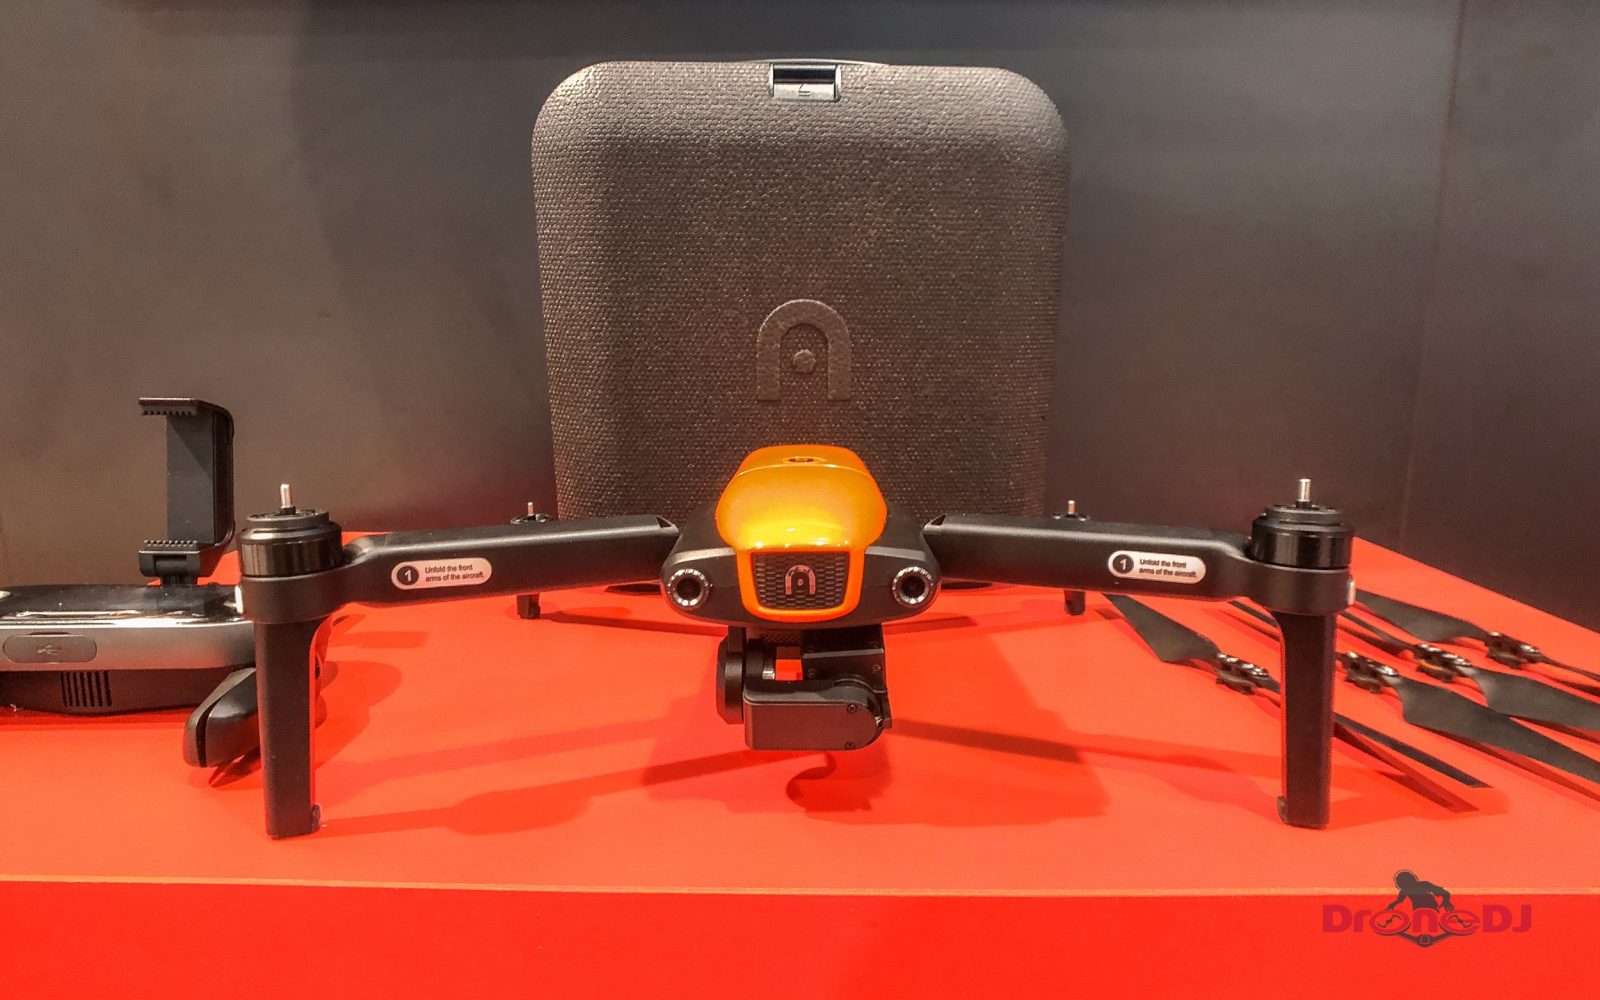 Autel Robotics finally releases the foldable EVO drone. Should DJI be worried?